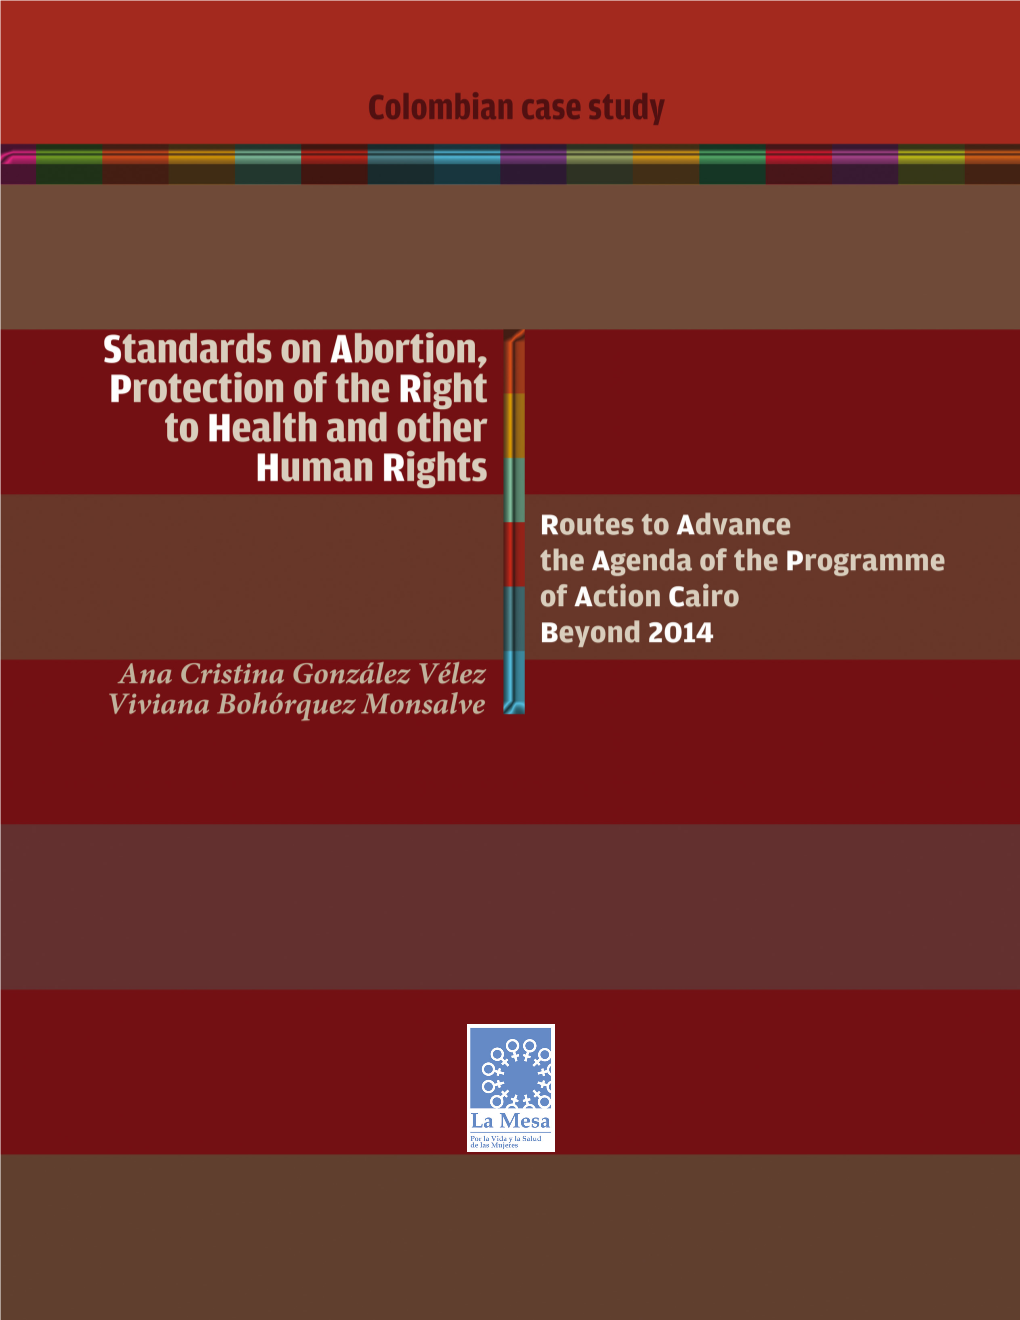 Standards on Abortion, Protection of the Right to Health and Other Human